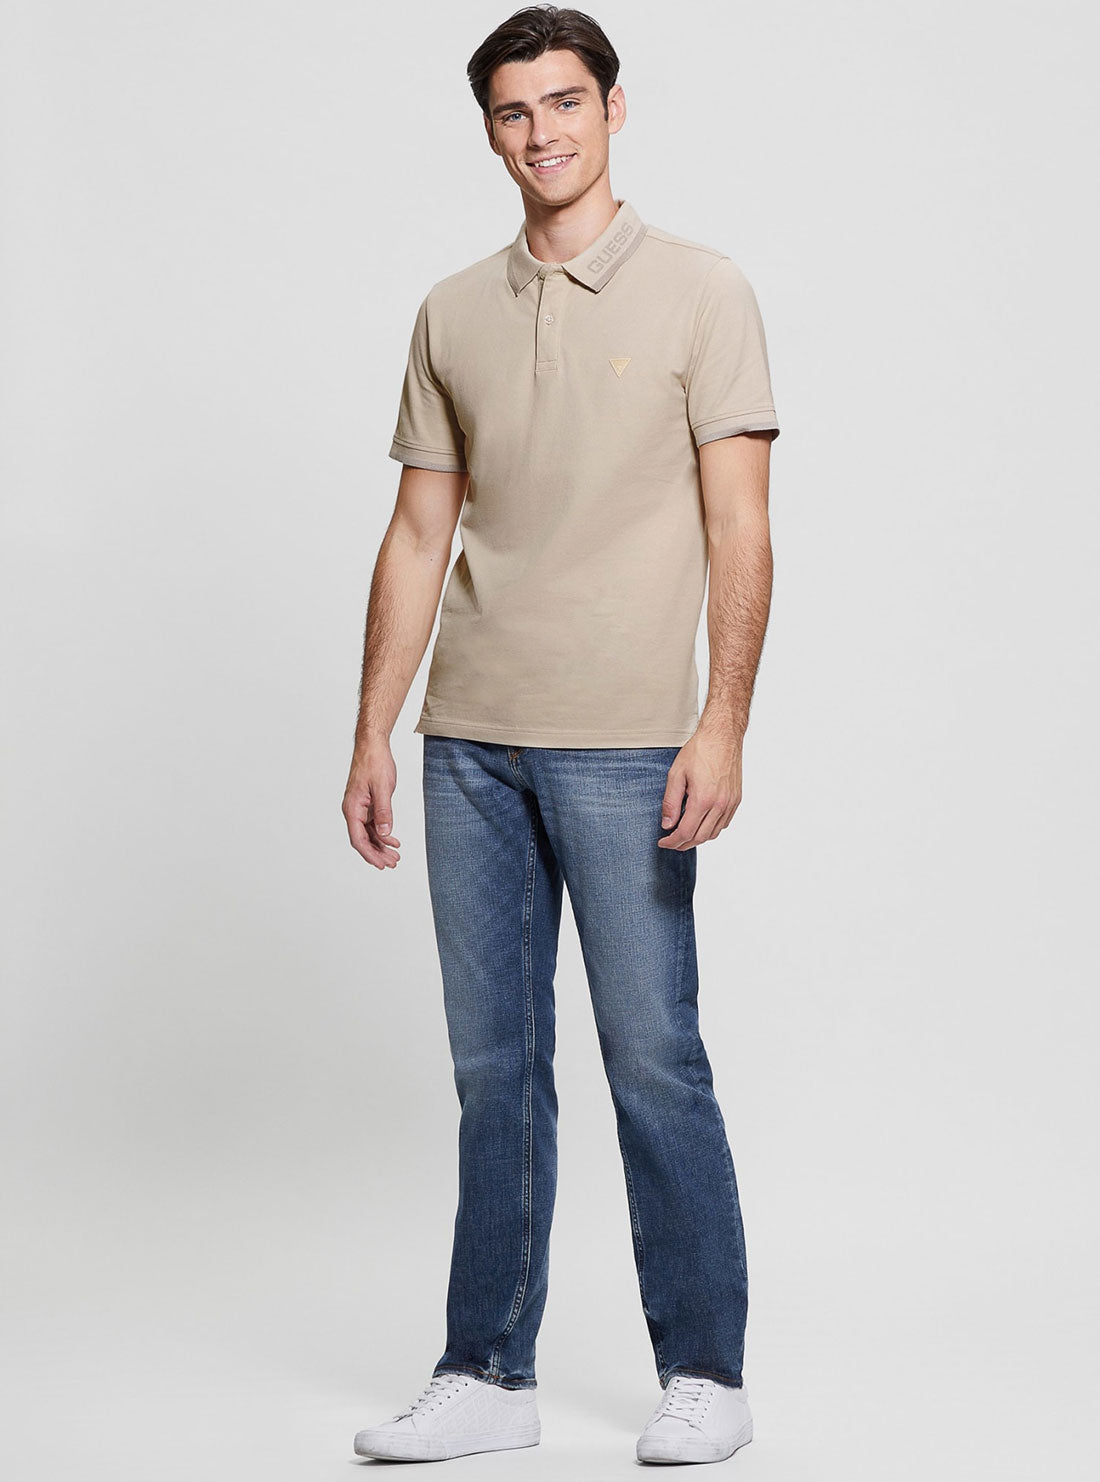 GUESS Beige Lyle Short Sleeve Polo T-Shirt full view